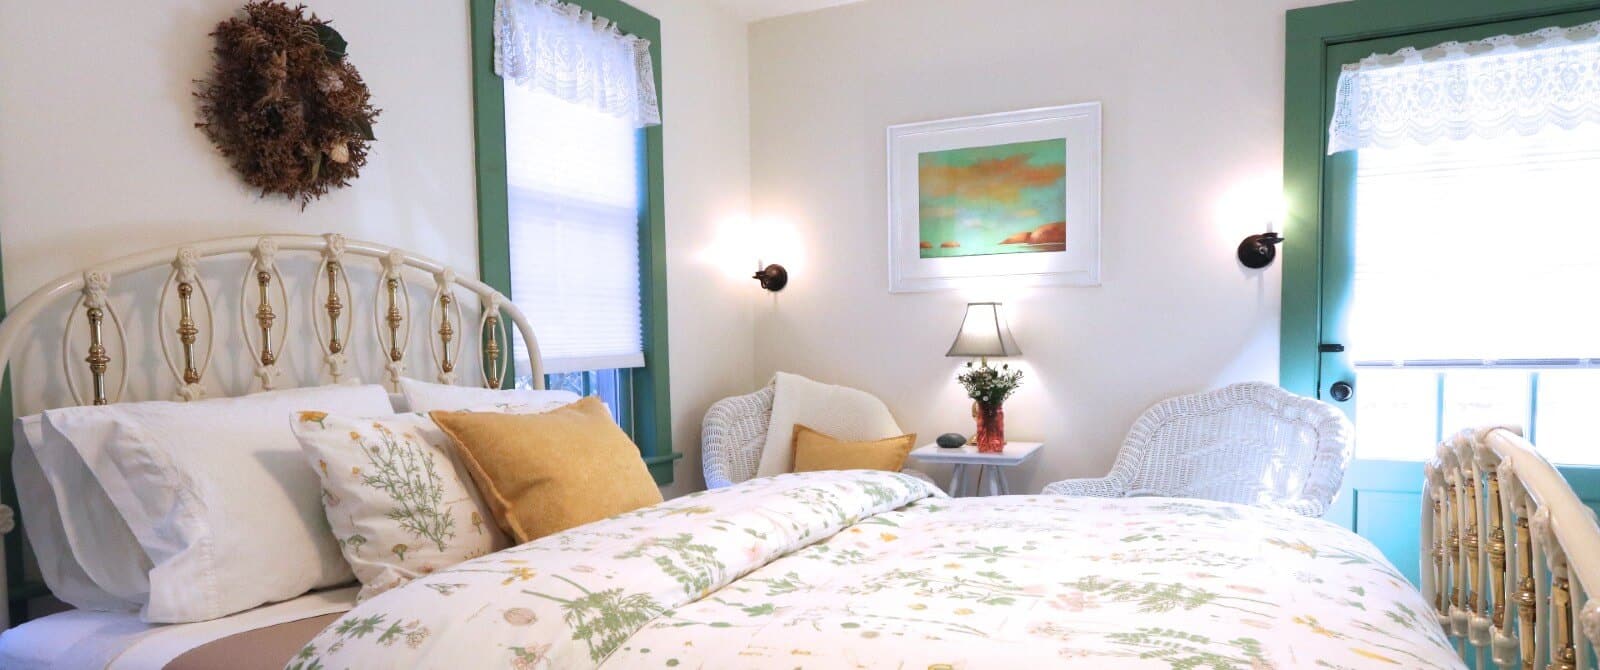 Bright bedroom with queen bed, floral bedding, white wicker chairs and green door